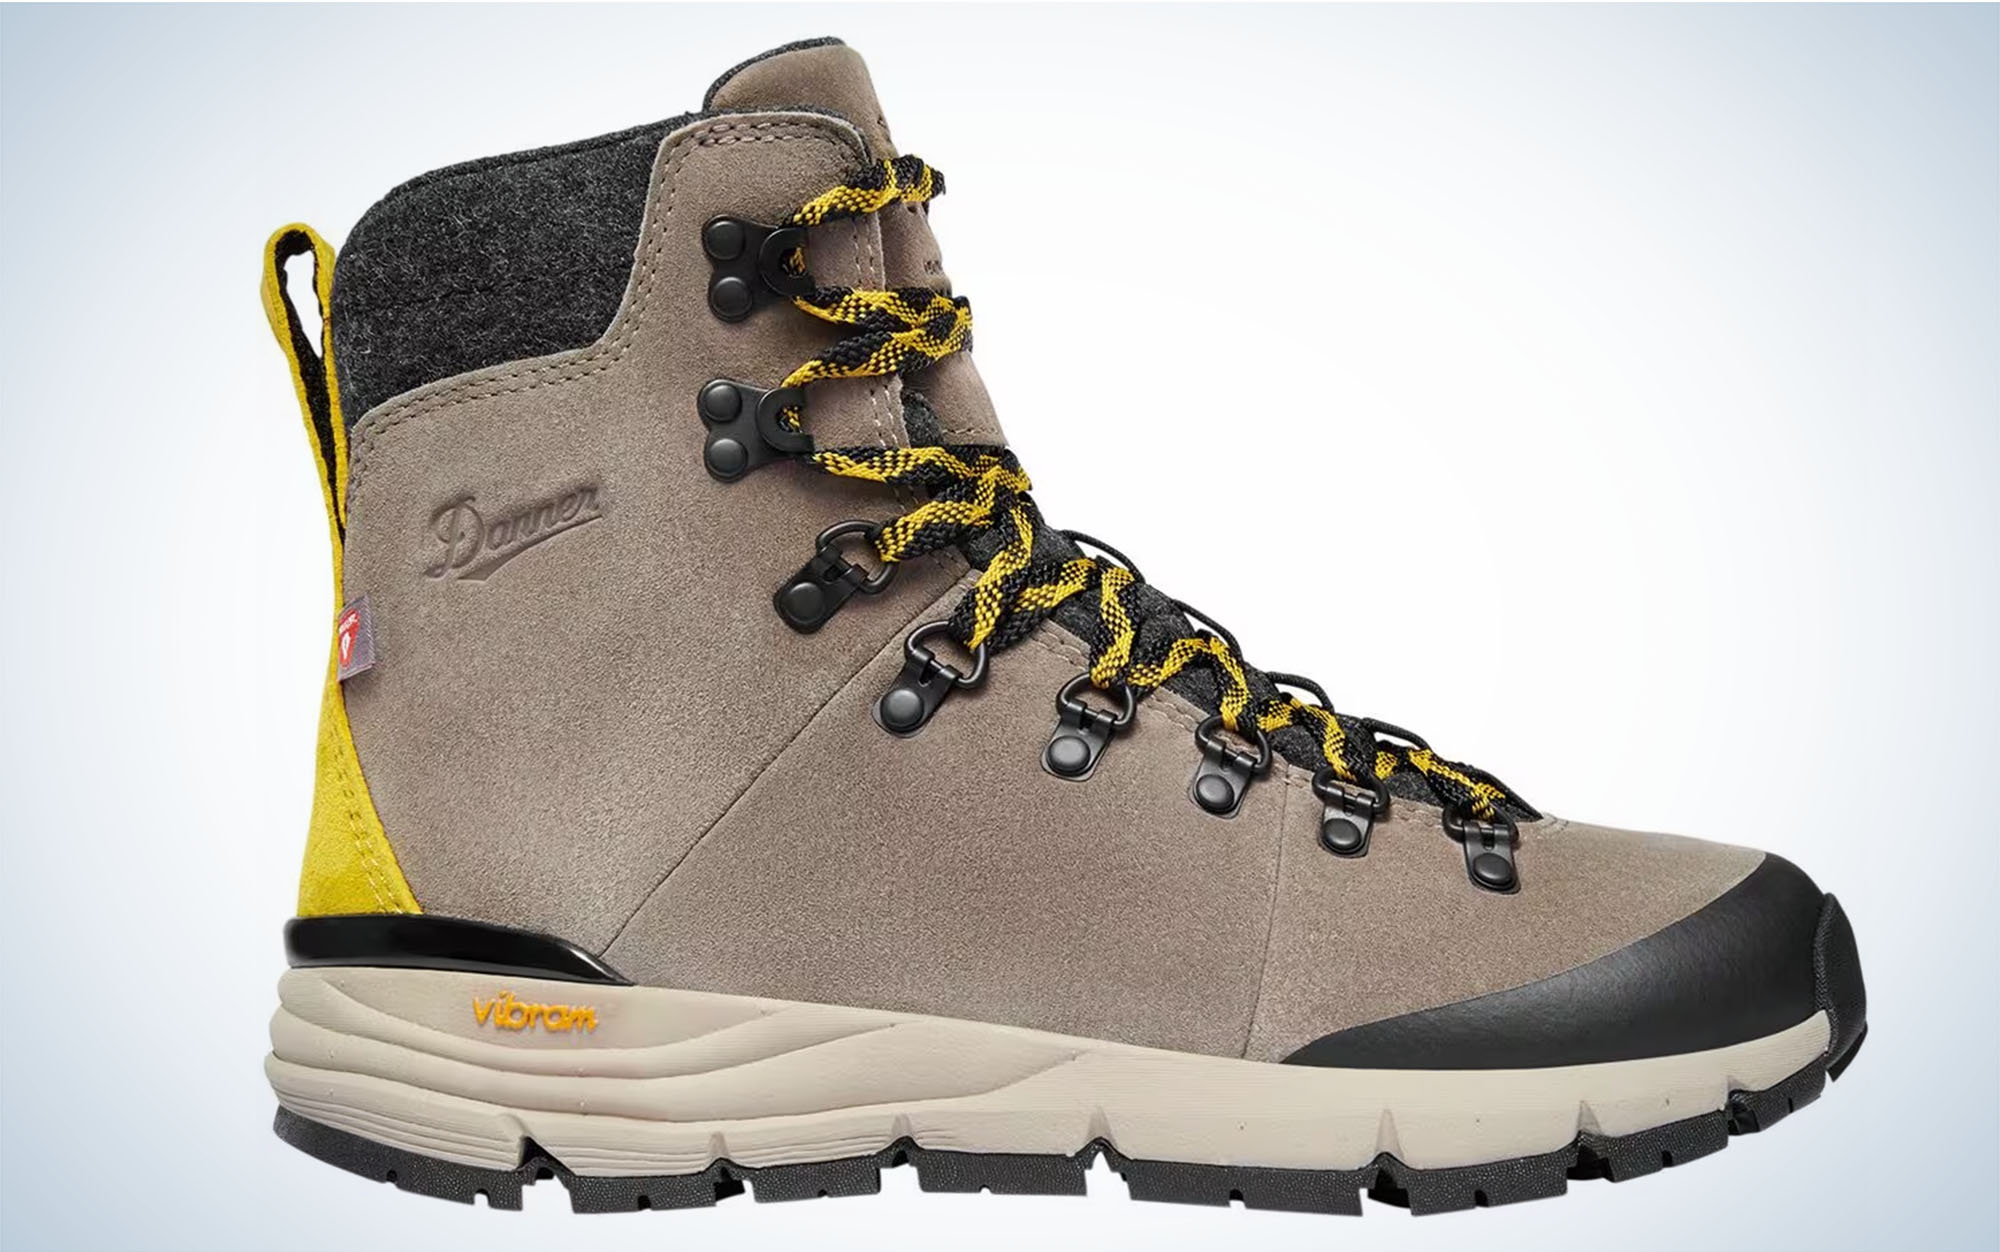 We tested the Danner Arctic 600.